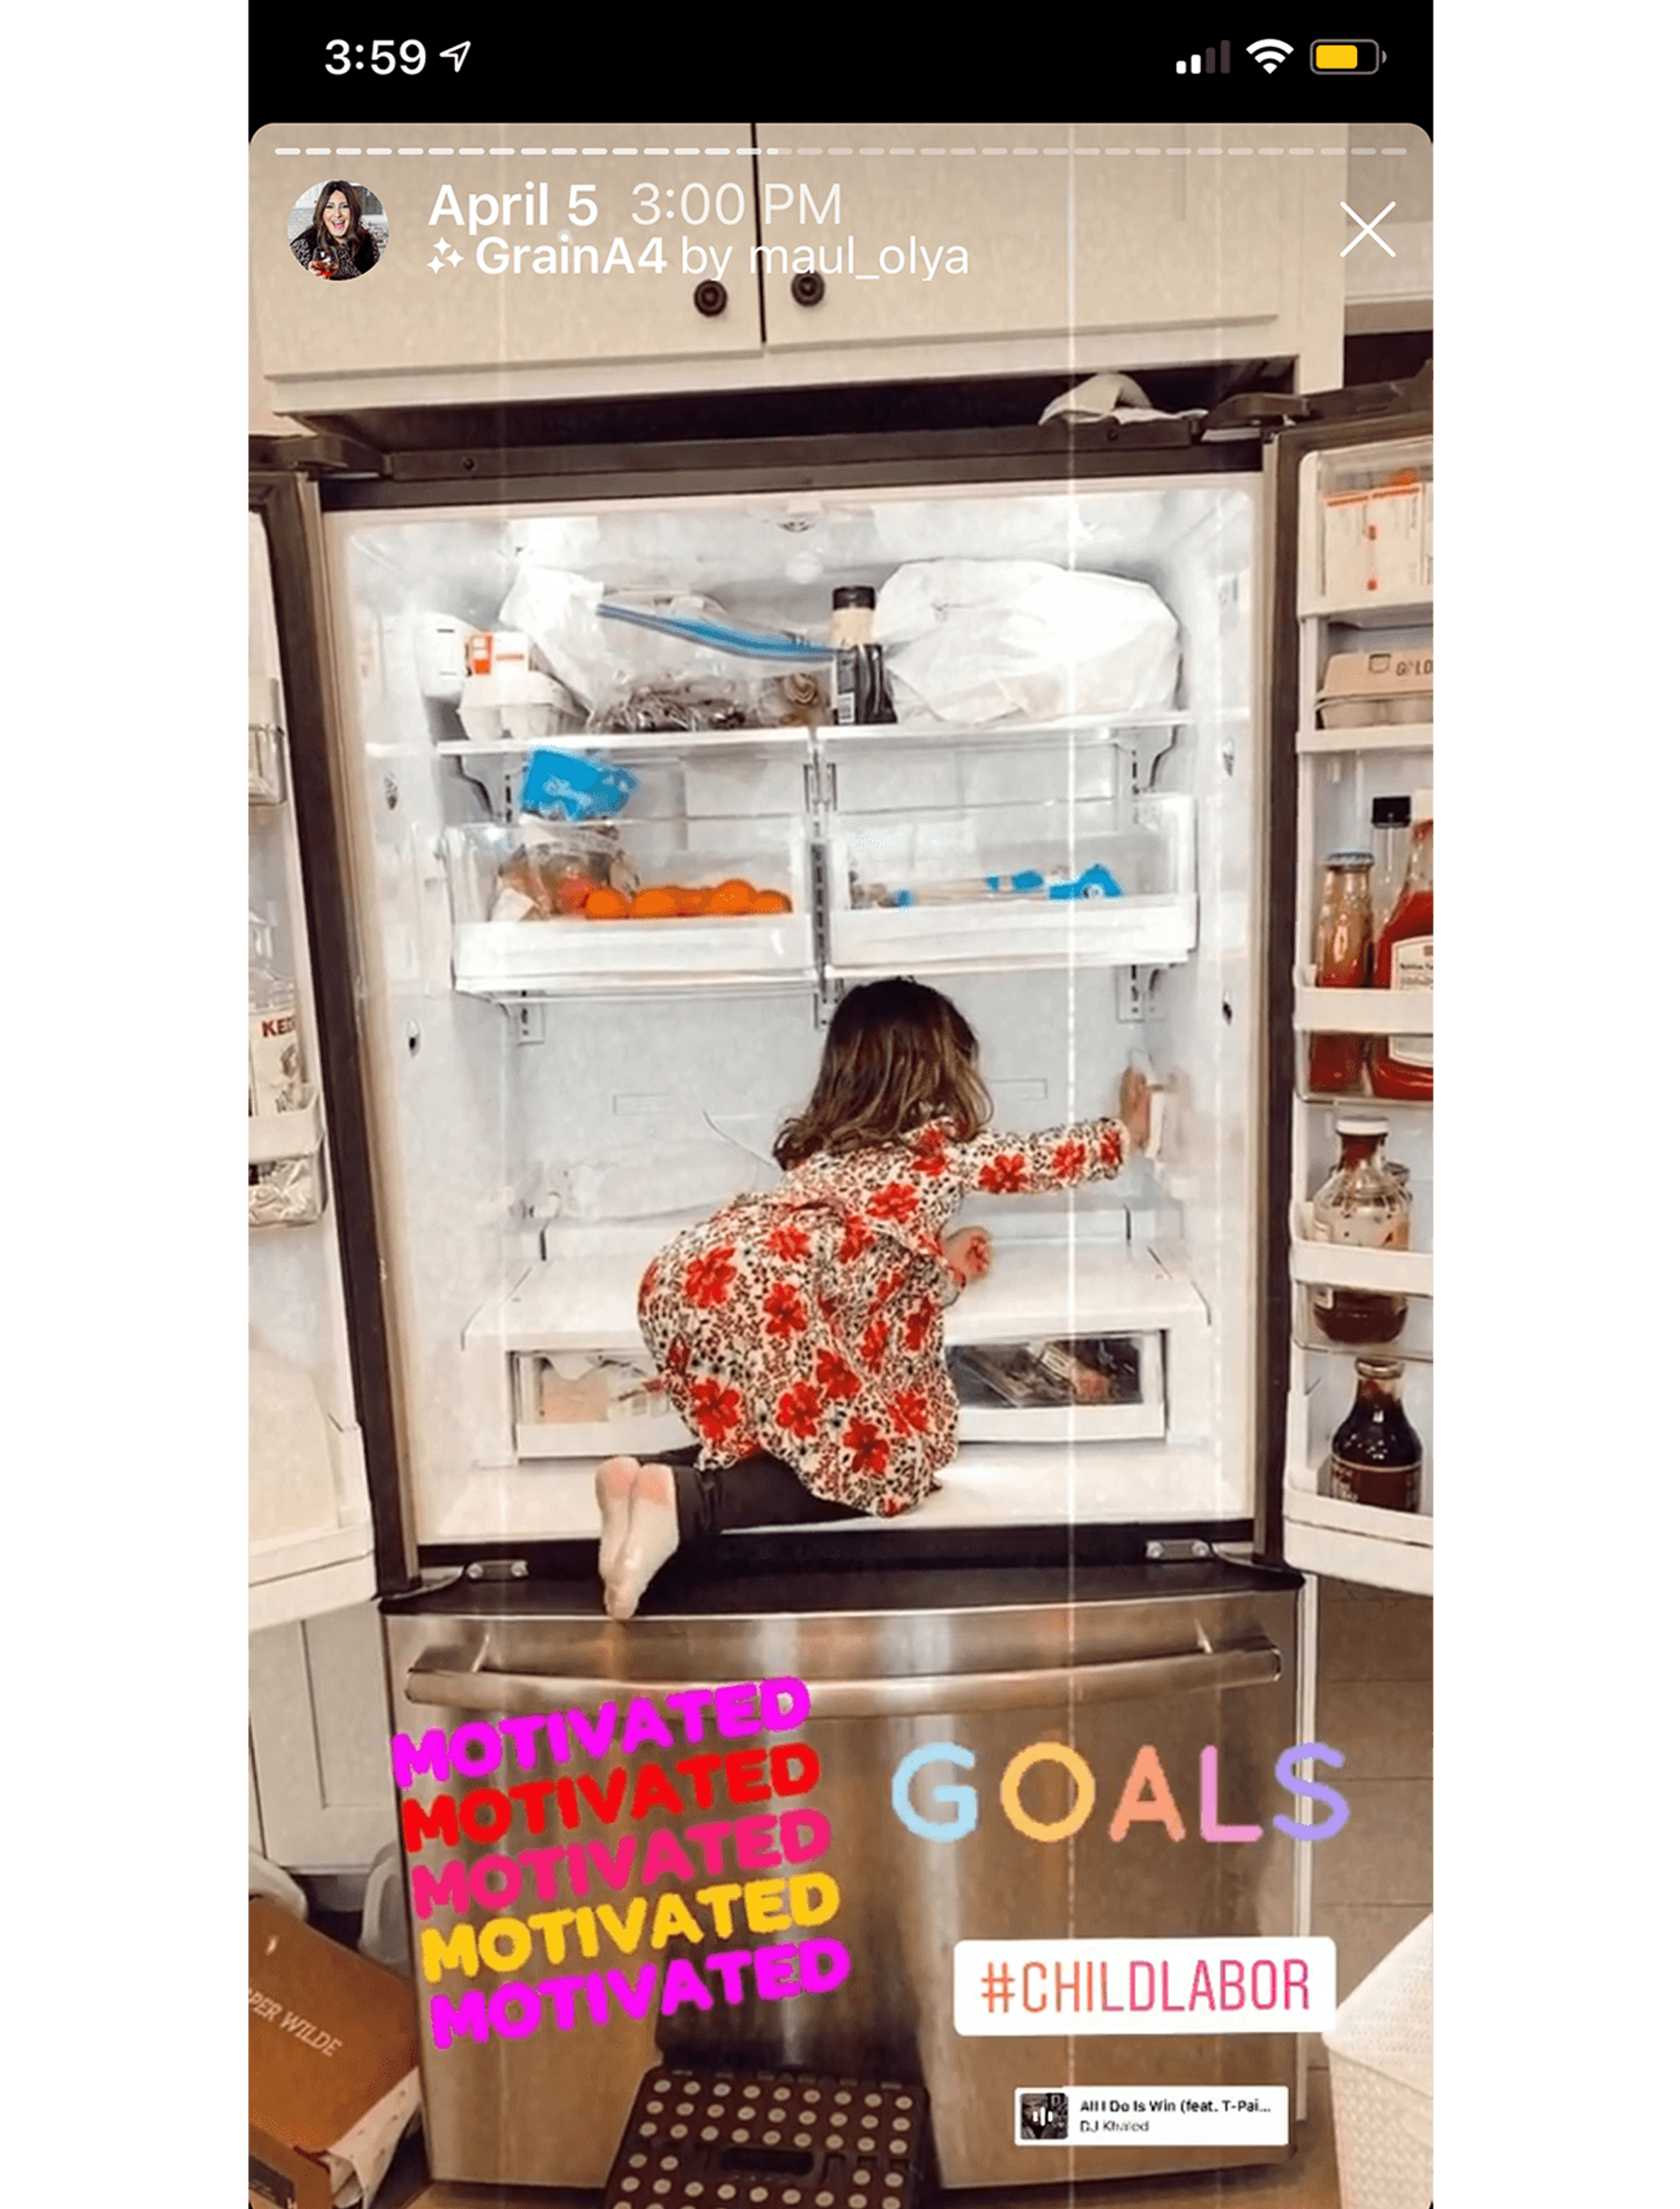 A little girl is kneeling inside the fridge while cleaning the shelves.